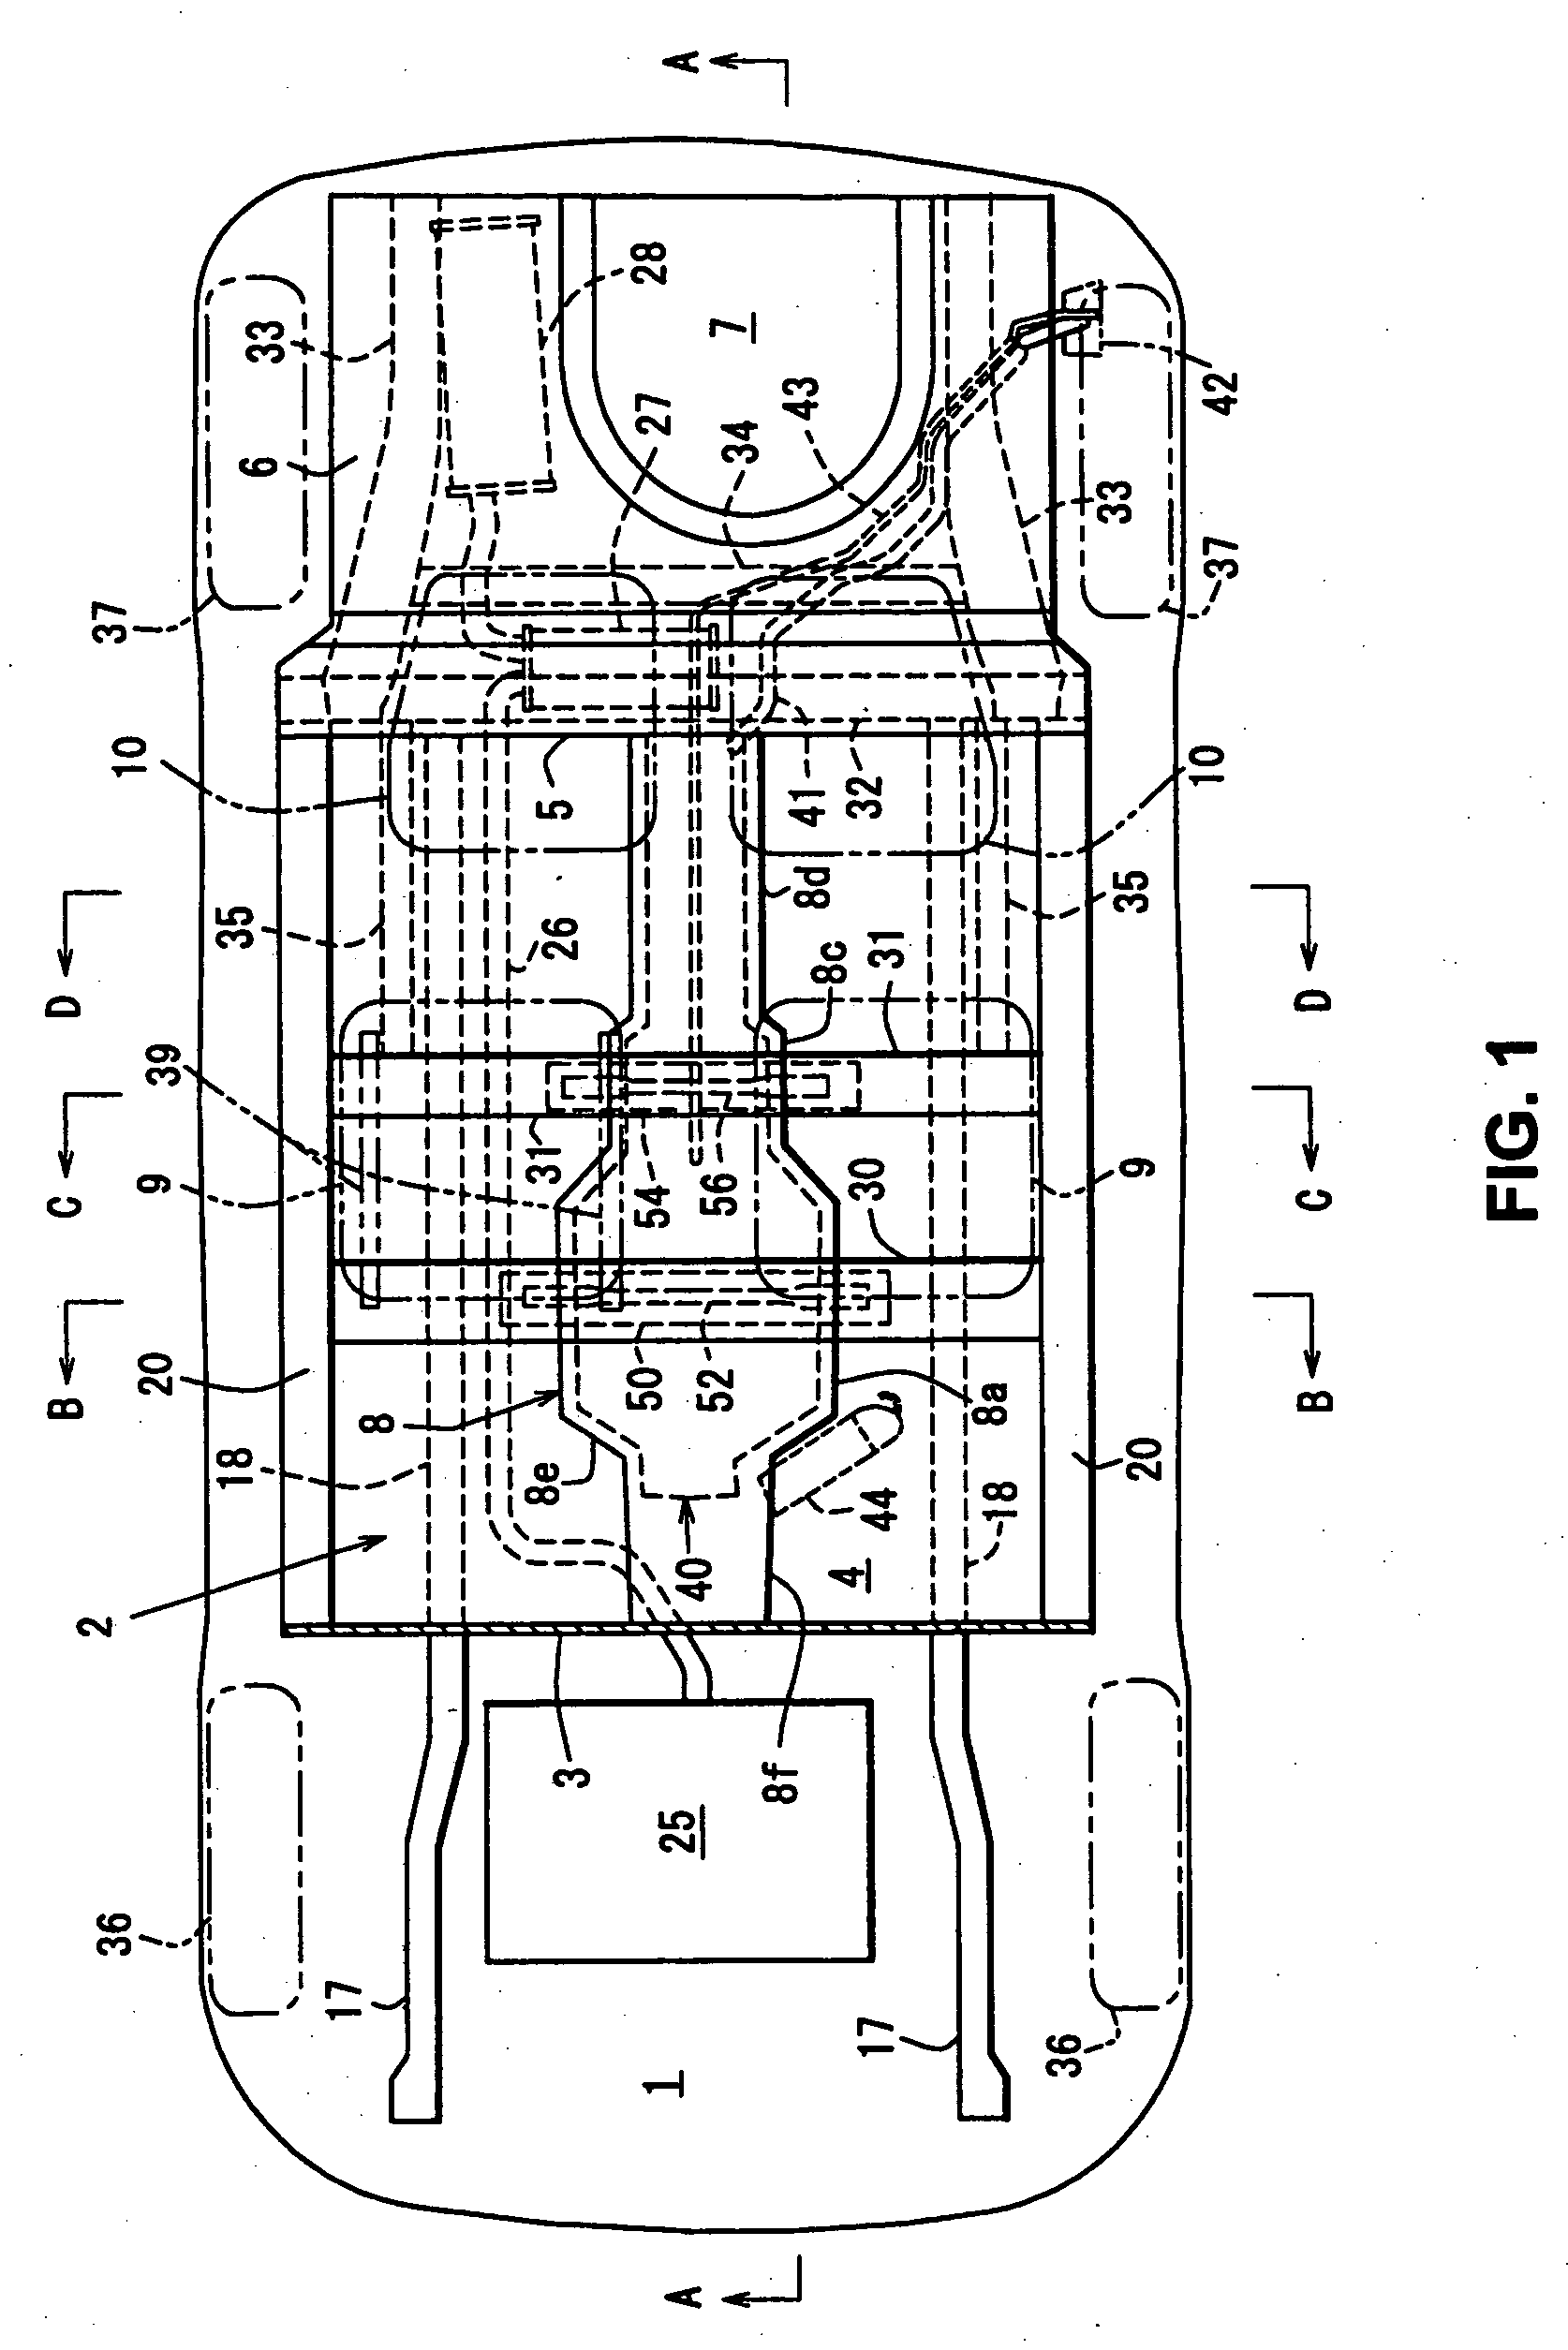 Fuel tank disposition structure of vehicle